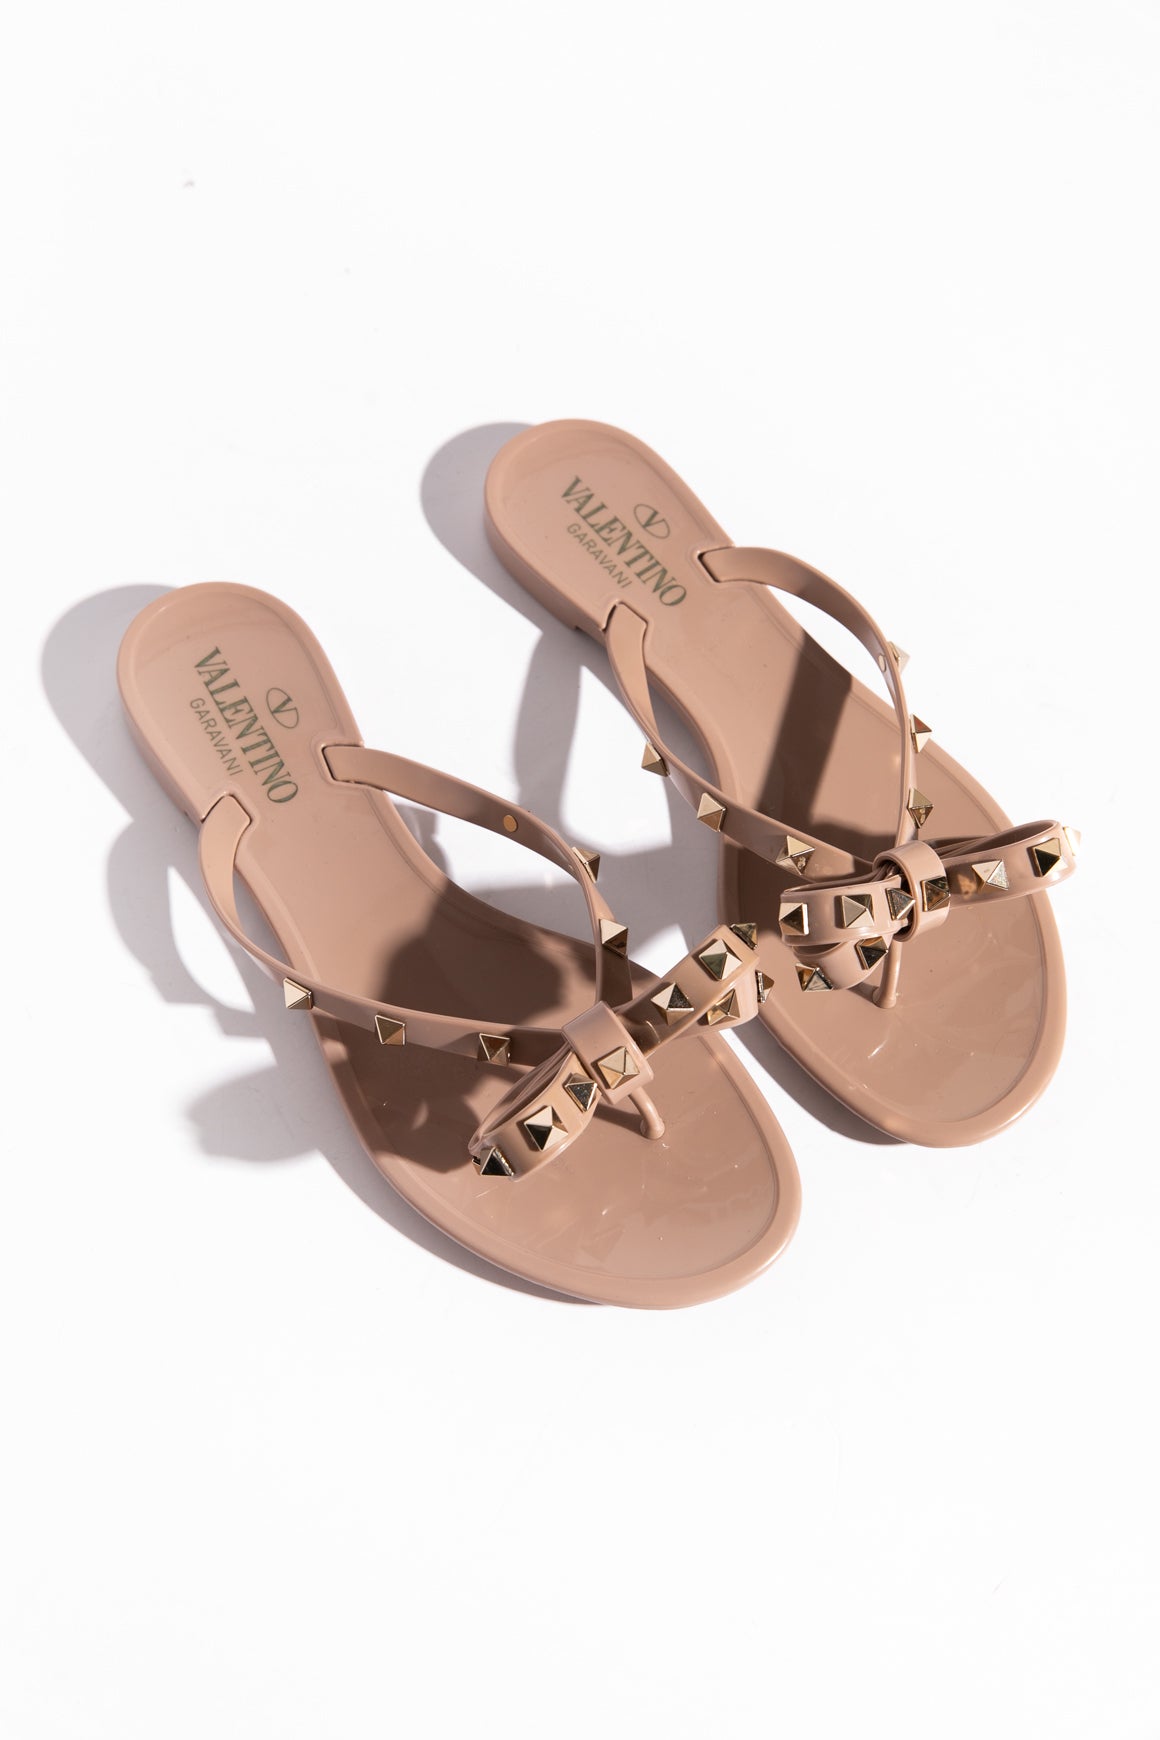 VALENTINO Dusty Rose Rubber Sandals (Sz. 37)